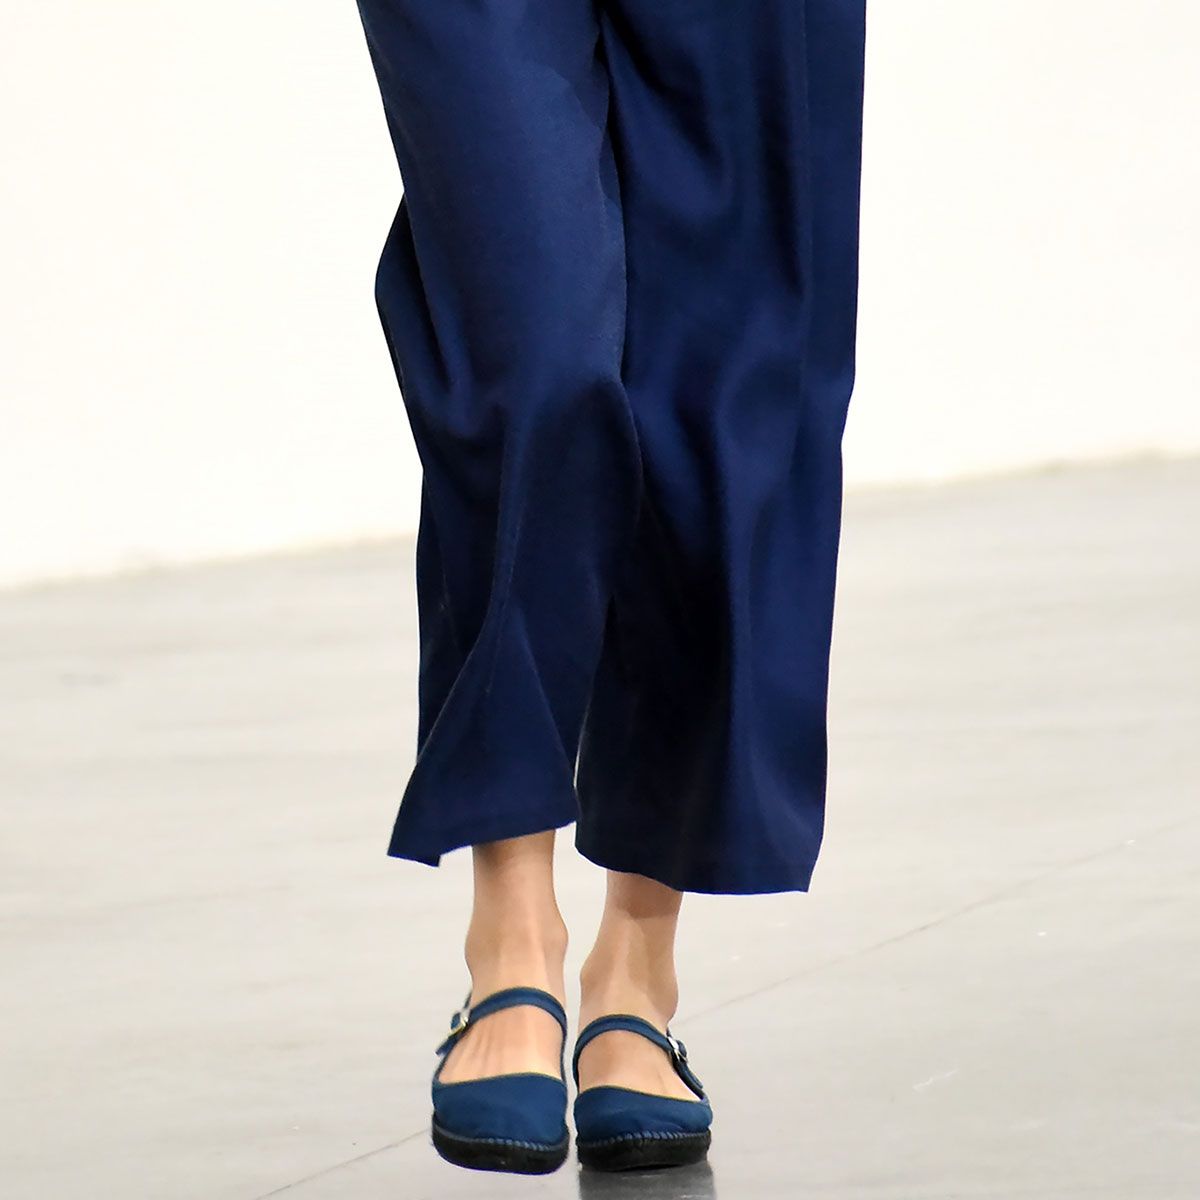 5 New Flats Trends That Are on the Rise in 2020 | Who What Wear